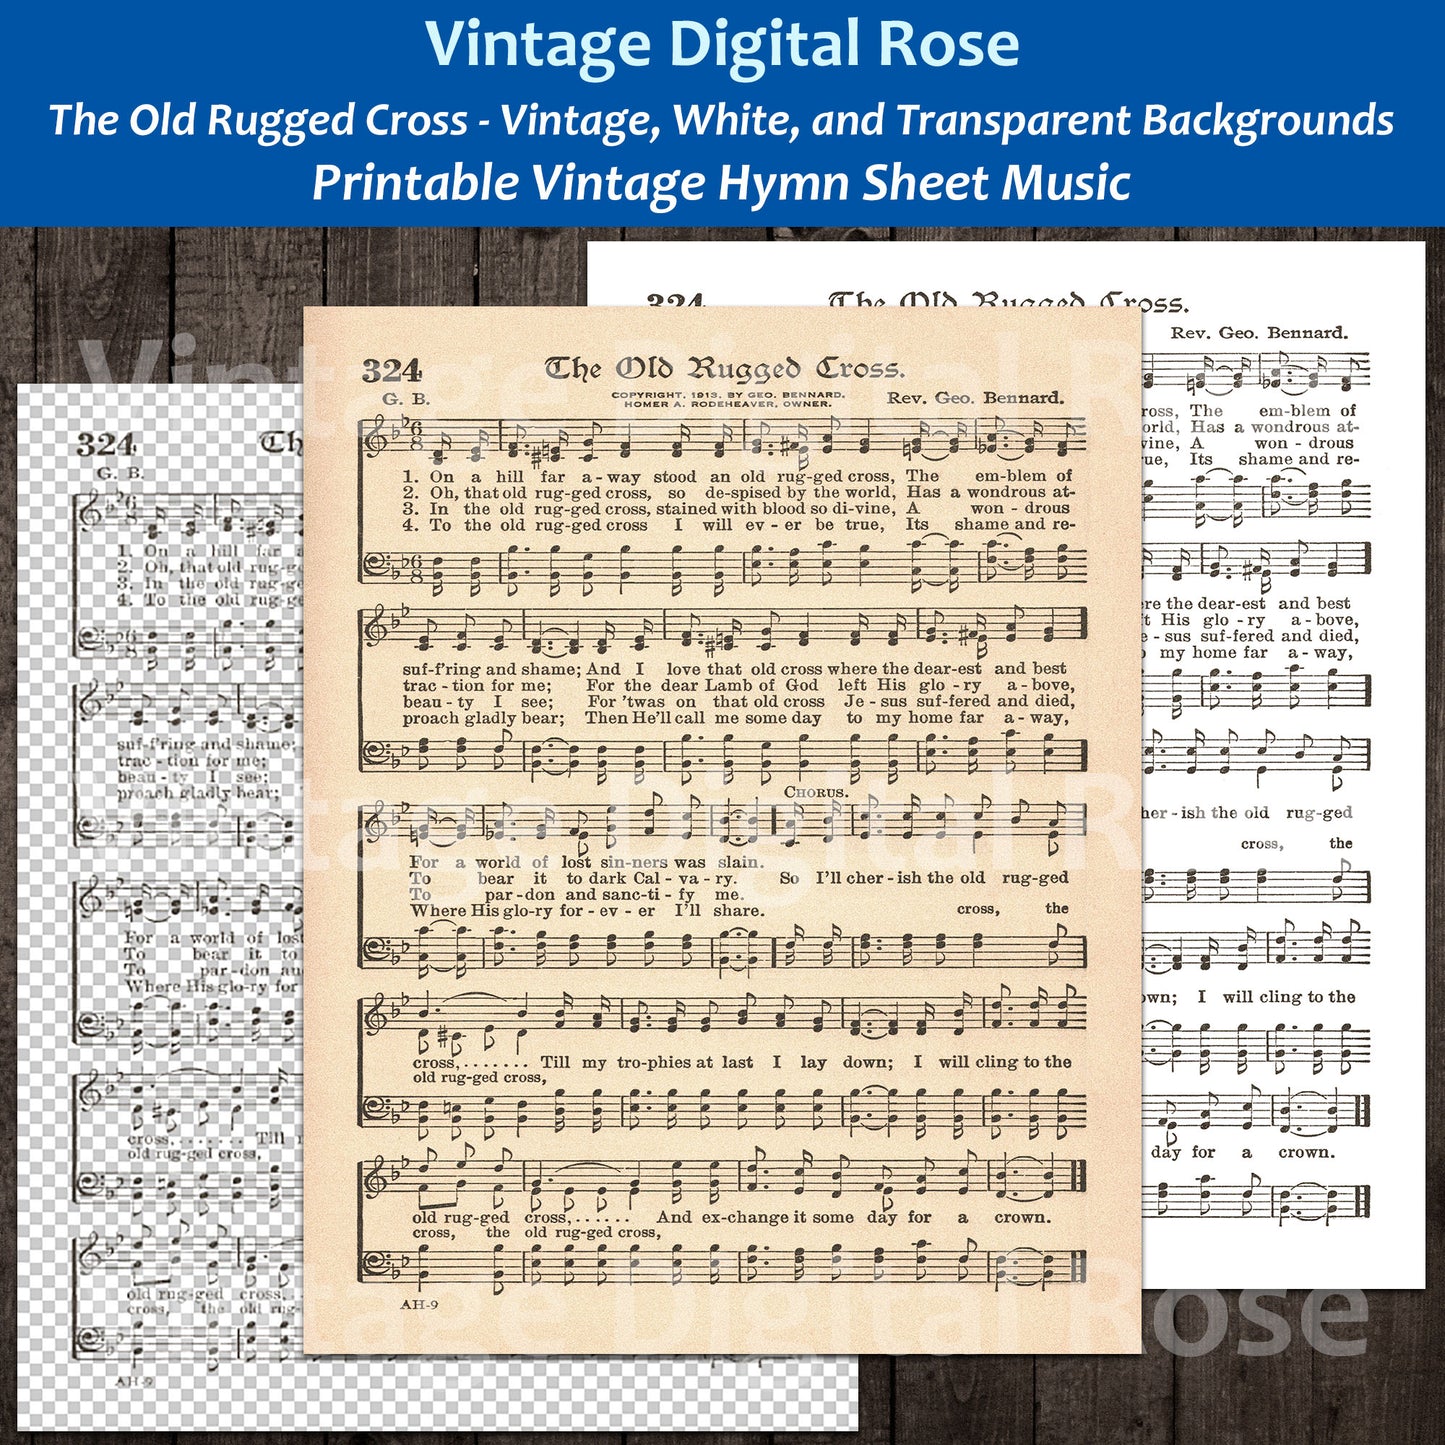 The Old Rugged Cross Printable Vintage Hymn Sheet Music - Vintage, White, and Transparent Backgrounds JPG PNG Files